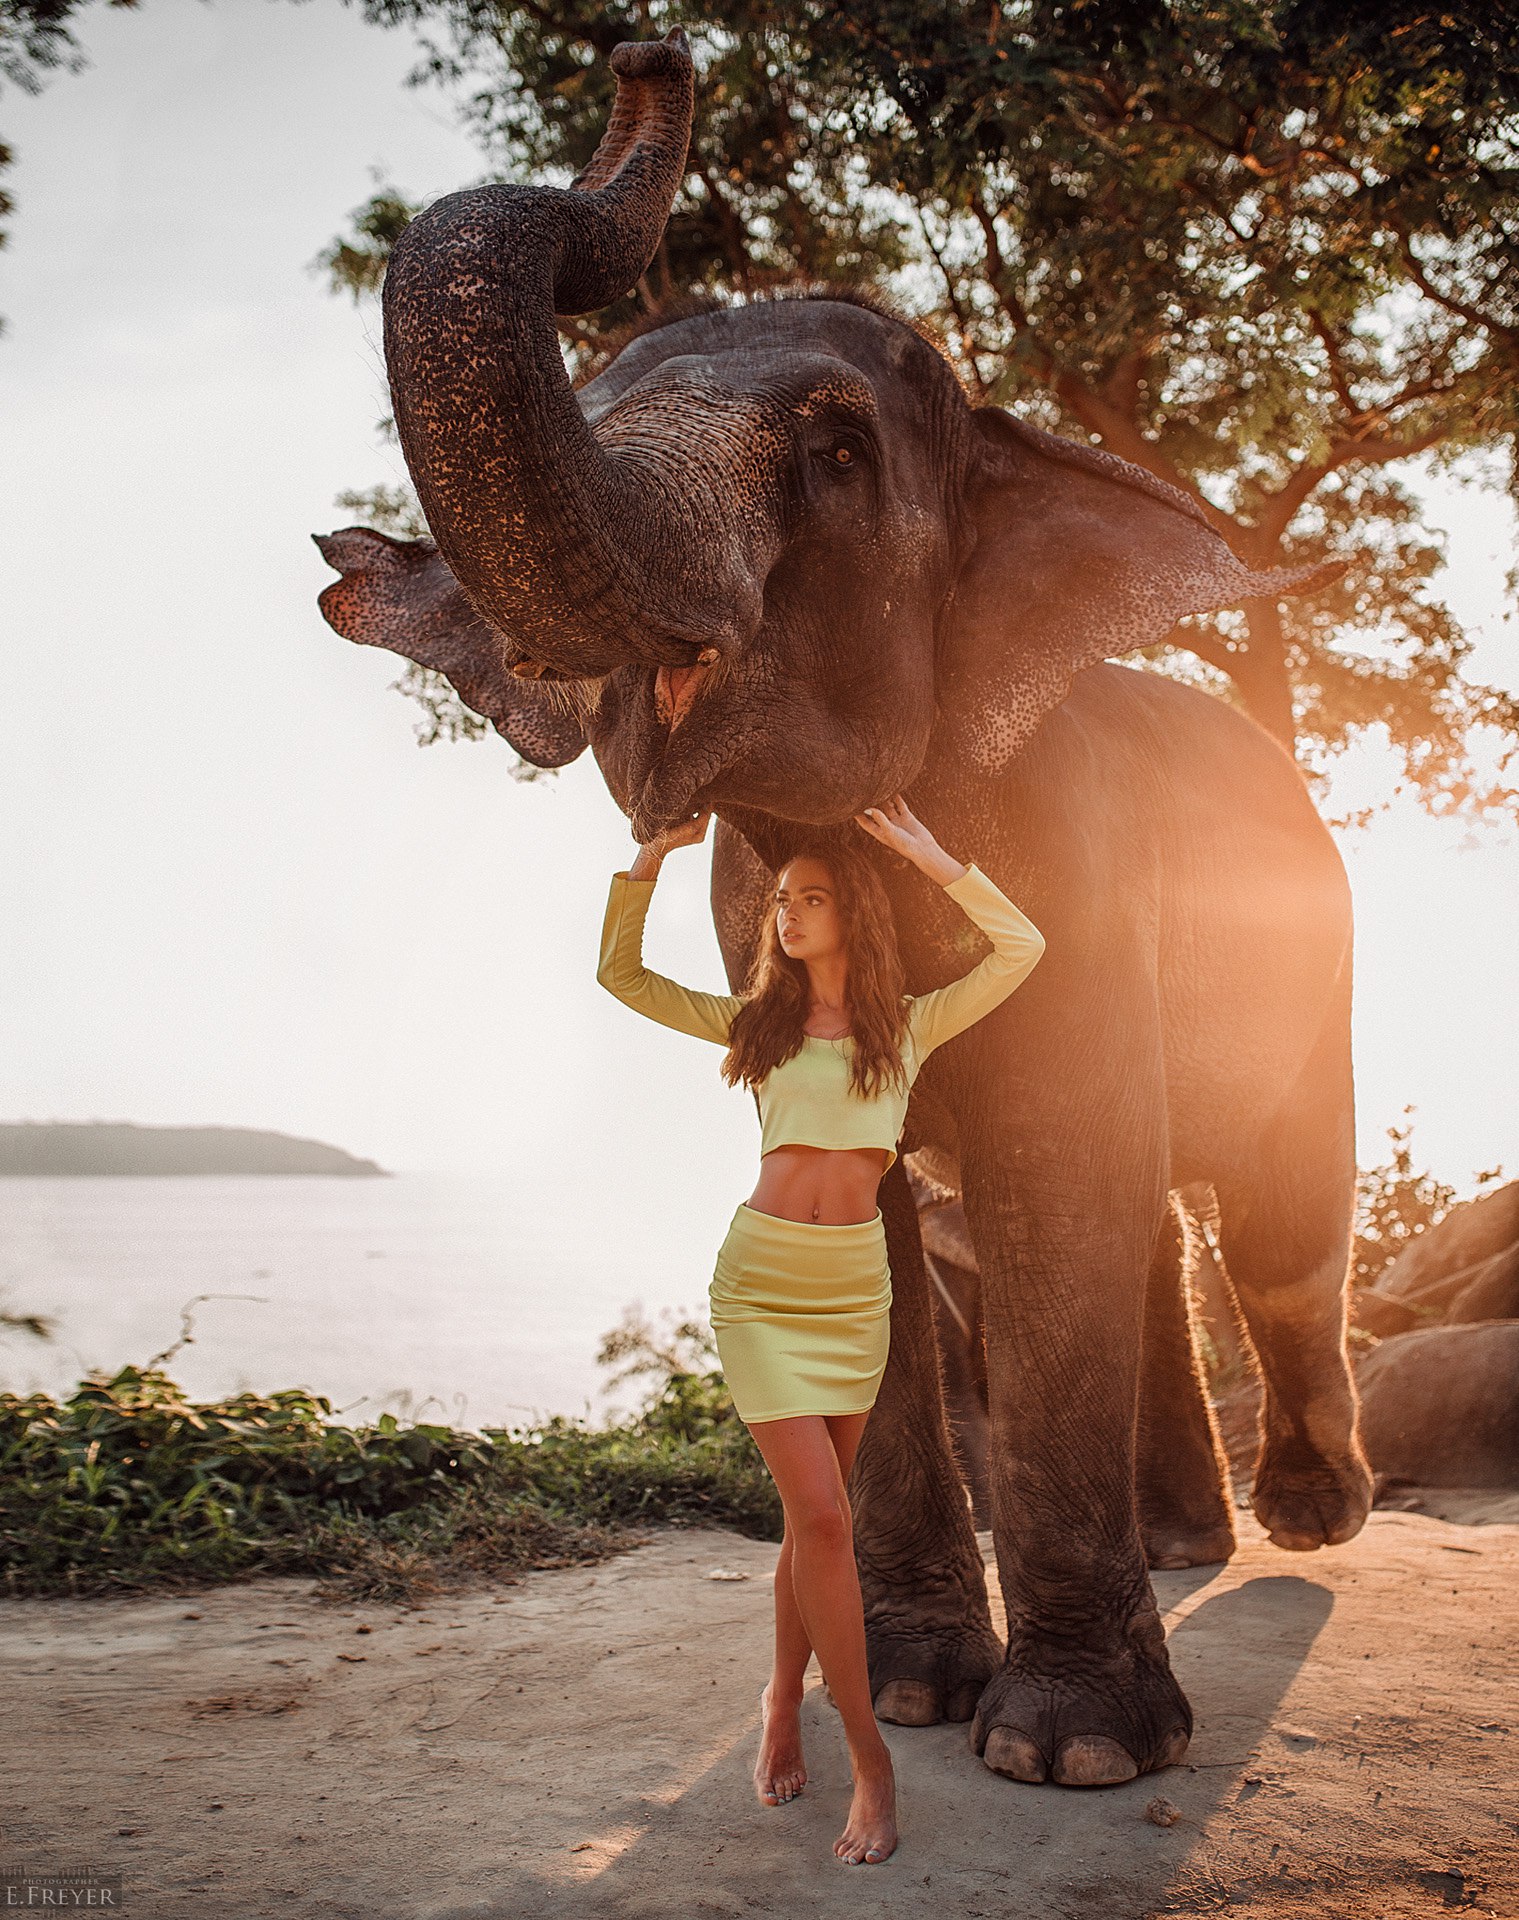 People 1519x1920 elephant Evgeny Freyer animals women model yellow clothing pointed toes